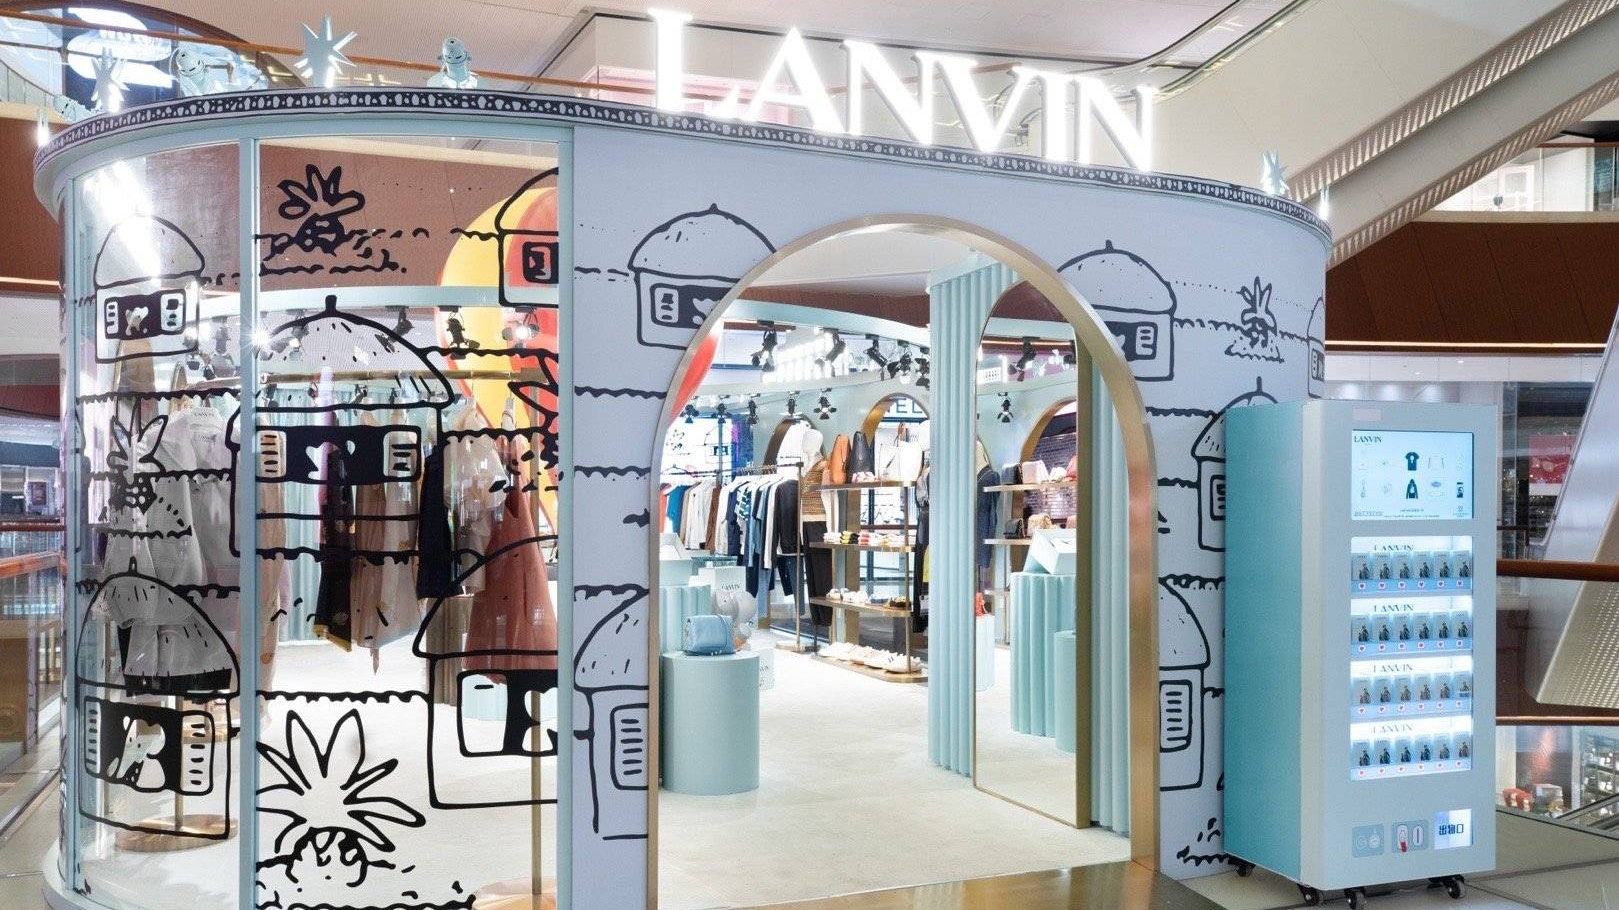 Given that blind boxes are China’s new obsession, Lanvin has been leveraging the trend to reach local Gen Zers. Photo: Courtesy of Lanvin